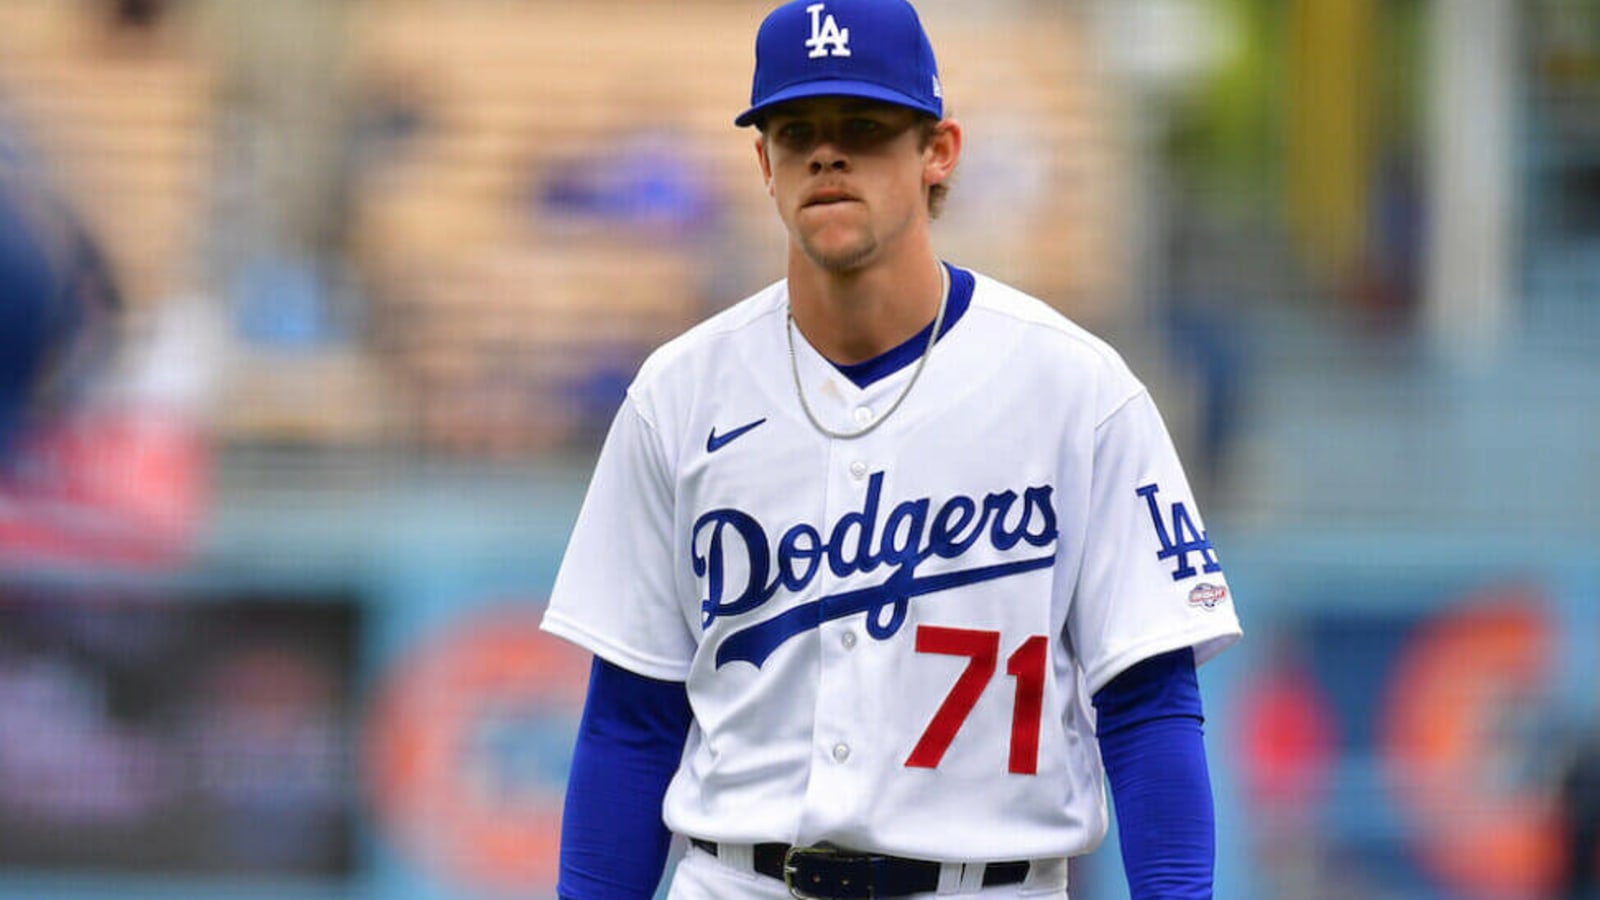 Dodgers debut new, all blue uniforms